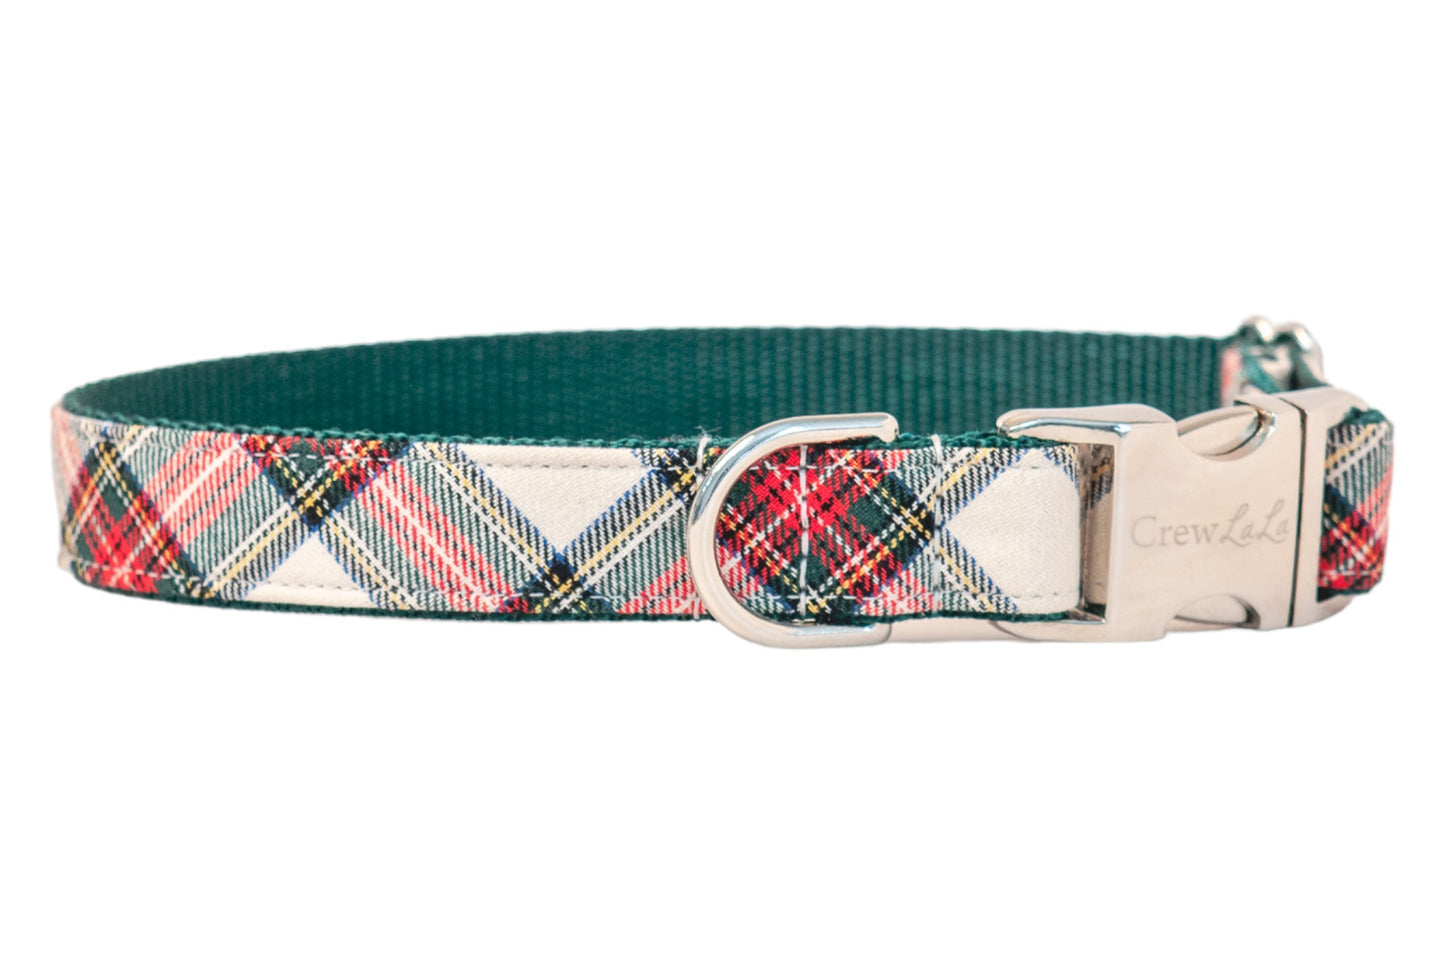 Ellie's Plaid Bow Tie Dog Collar- Two Styles! - Crew LaLa